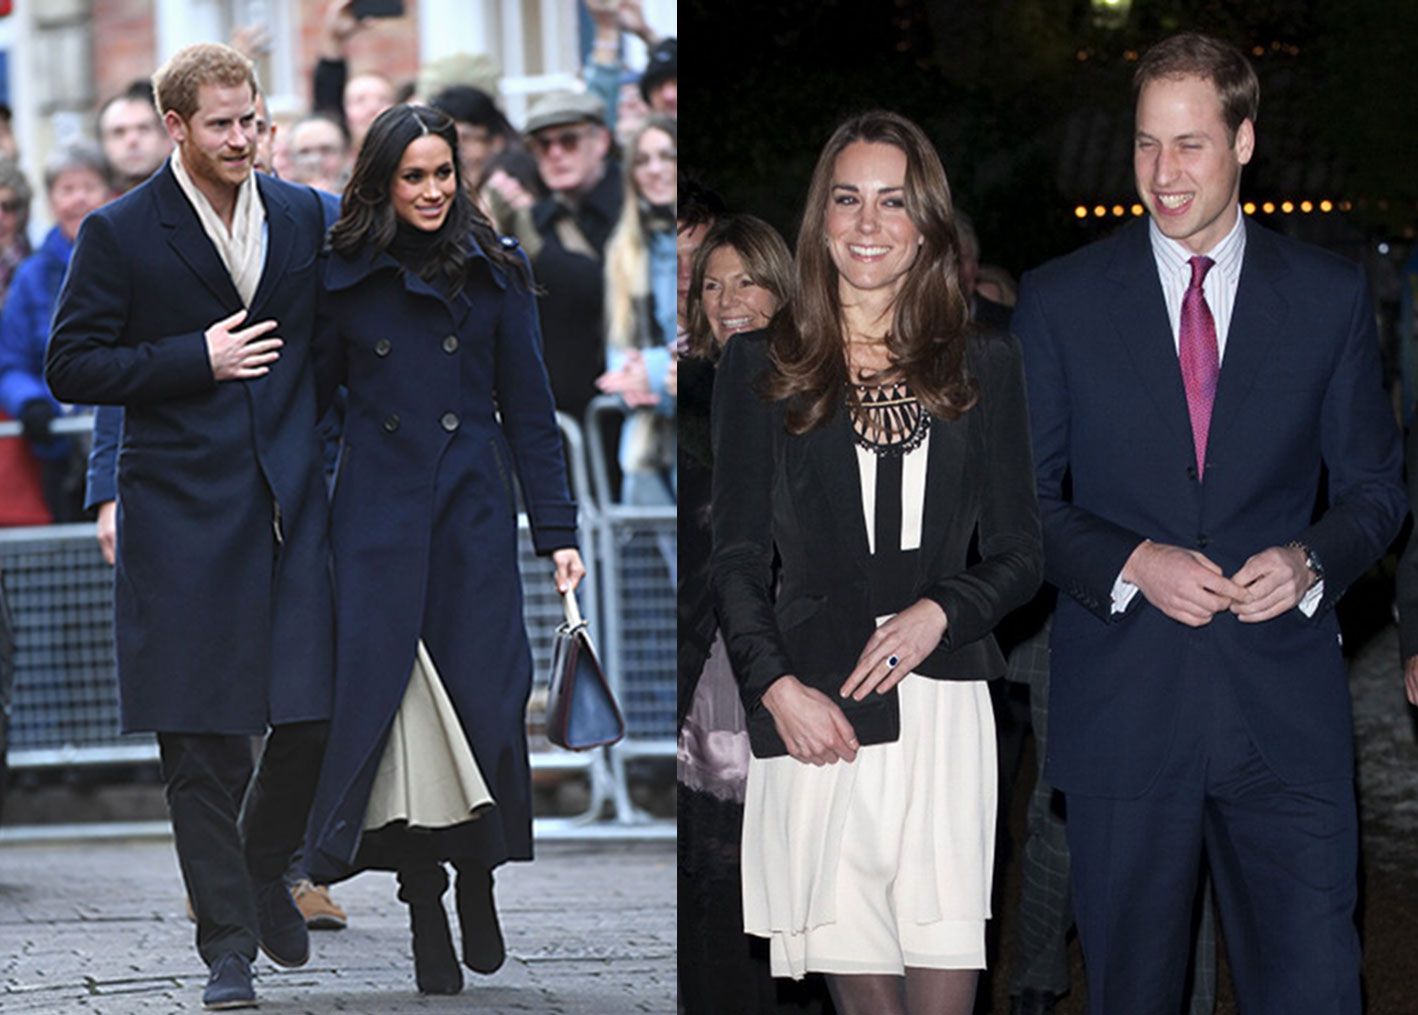 Meghan Markle and Prince Harry first royal engagement compared to Duke and Duchess of Cambridge